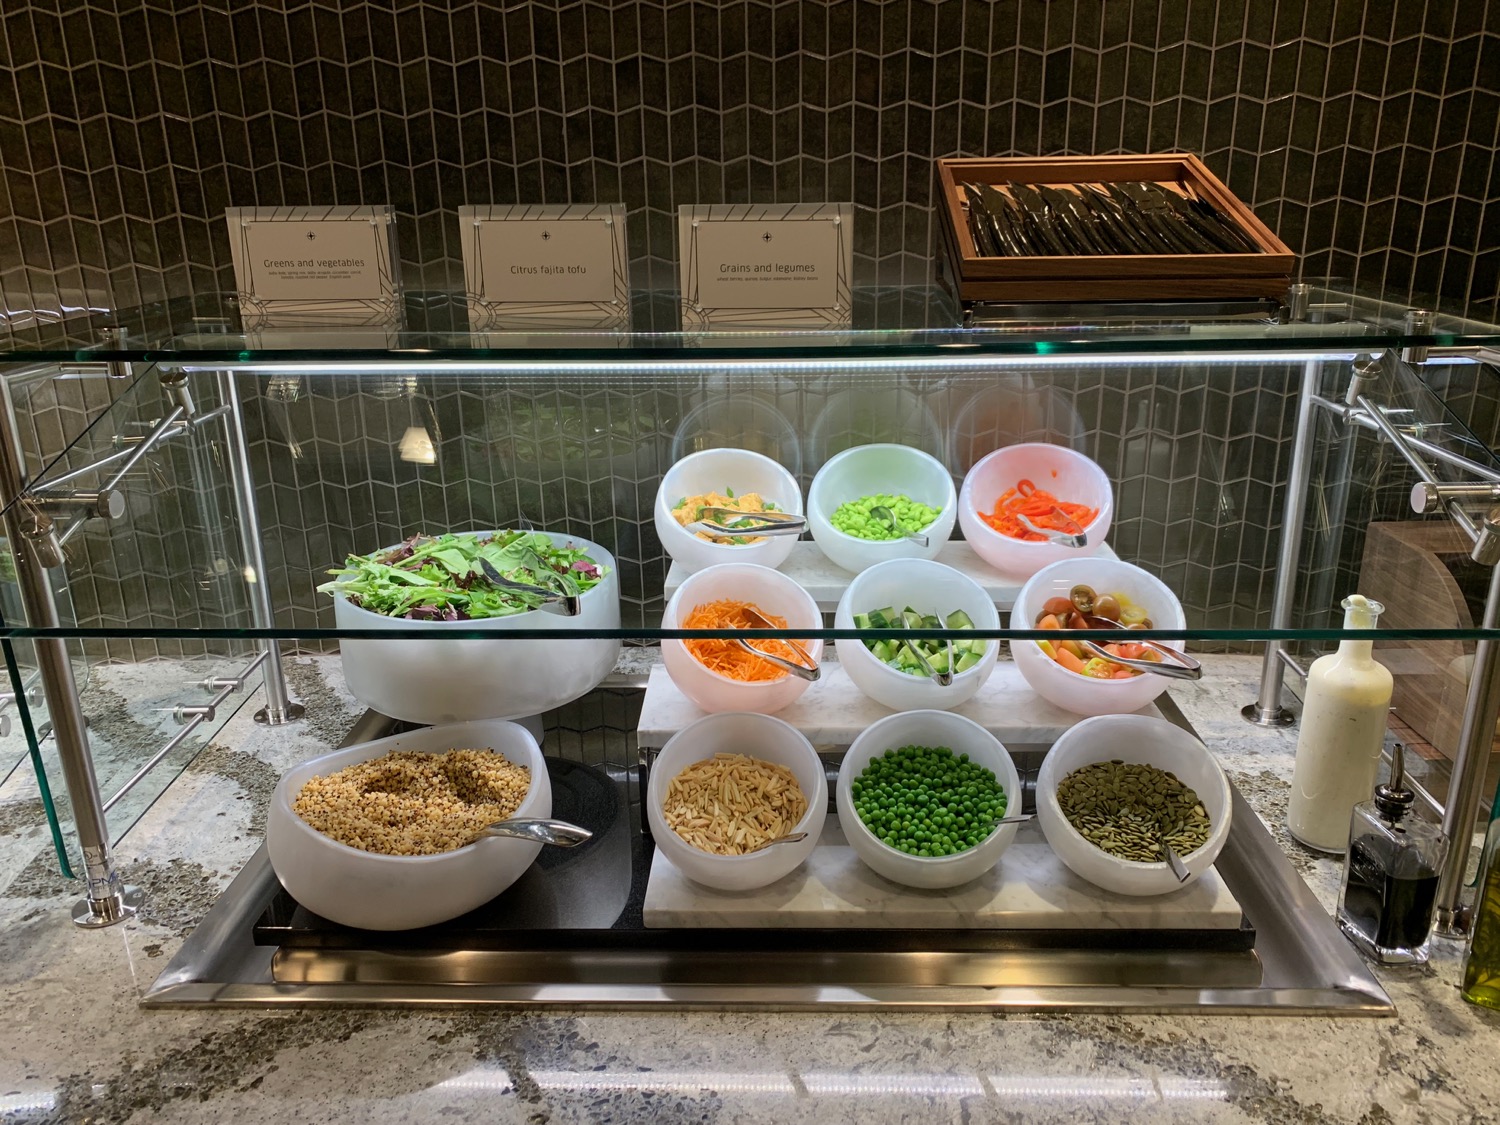 a display of food in bowls